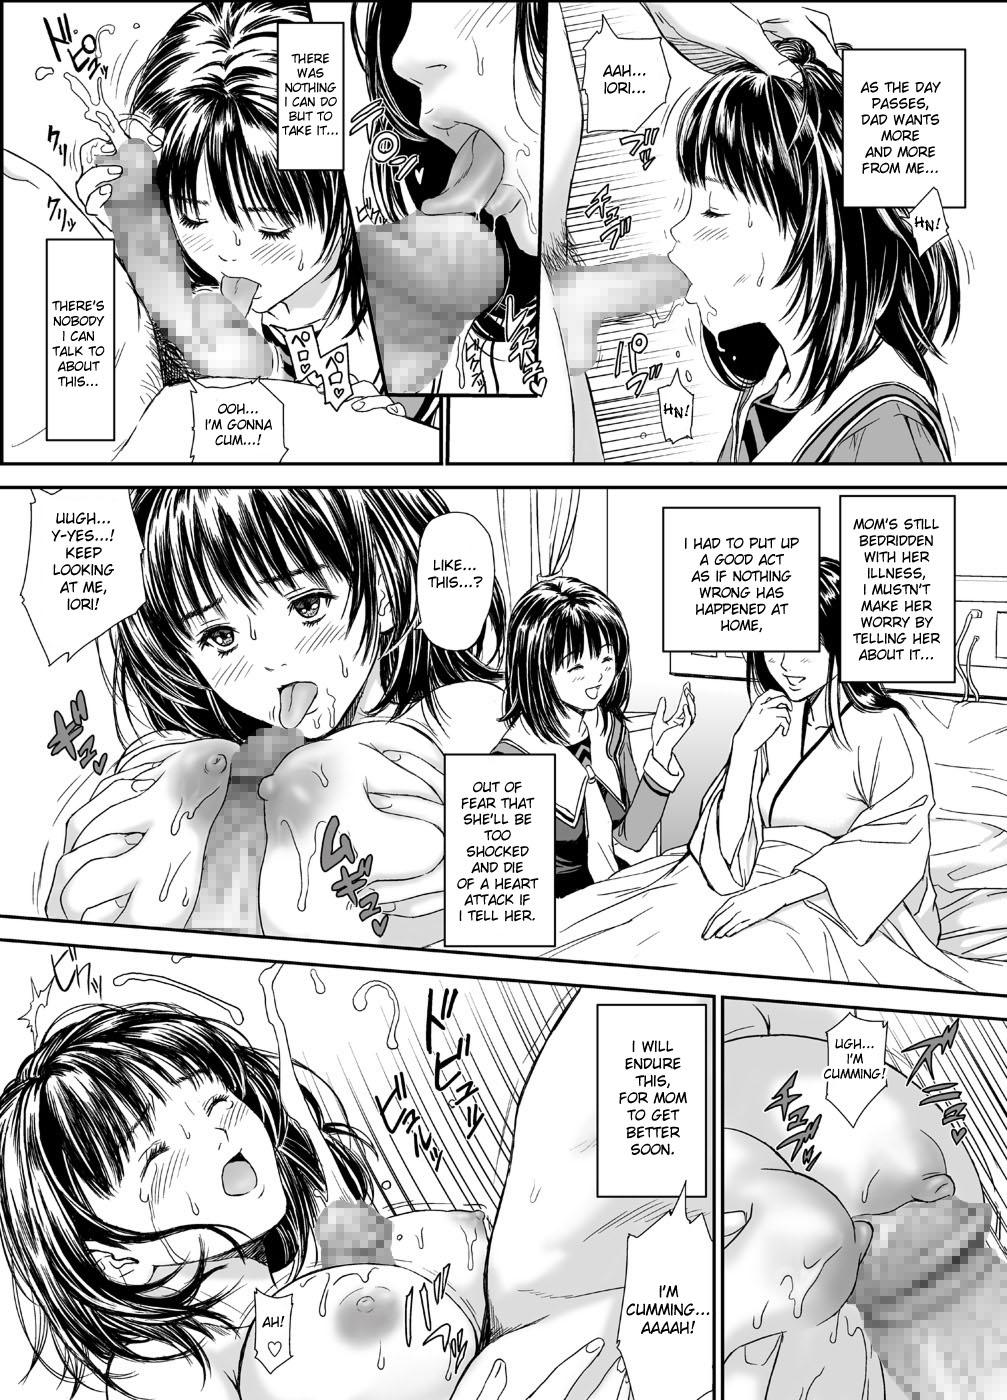 Bathroom Iori - The Dark Side Of That Girl - Is Students - Page 12